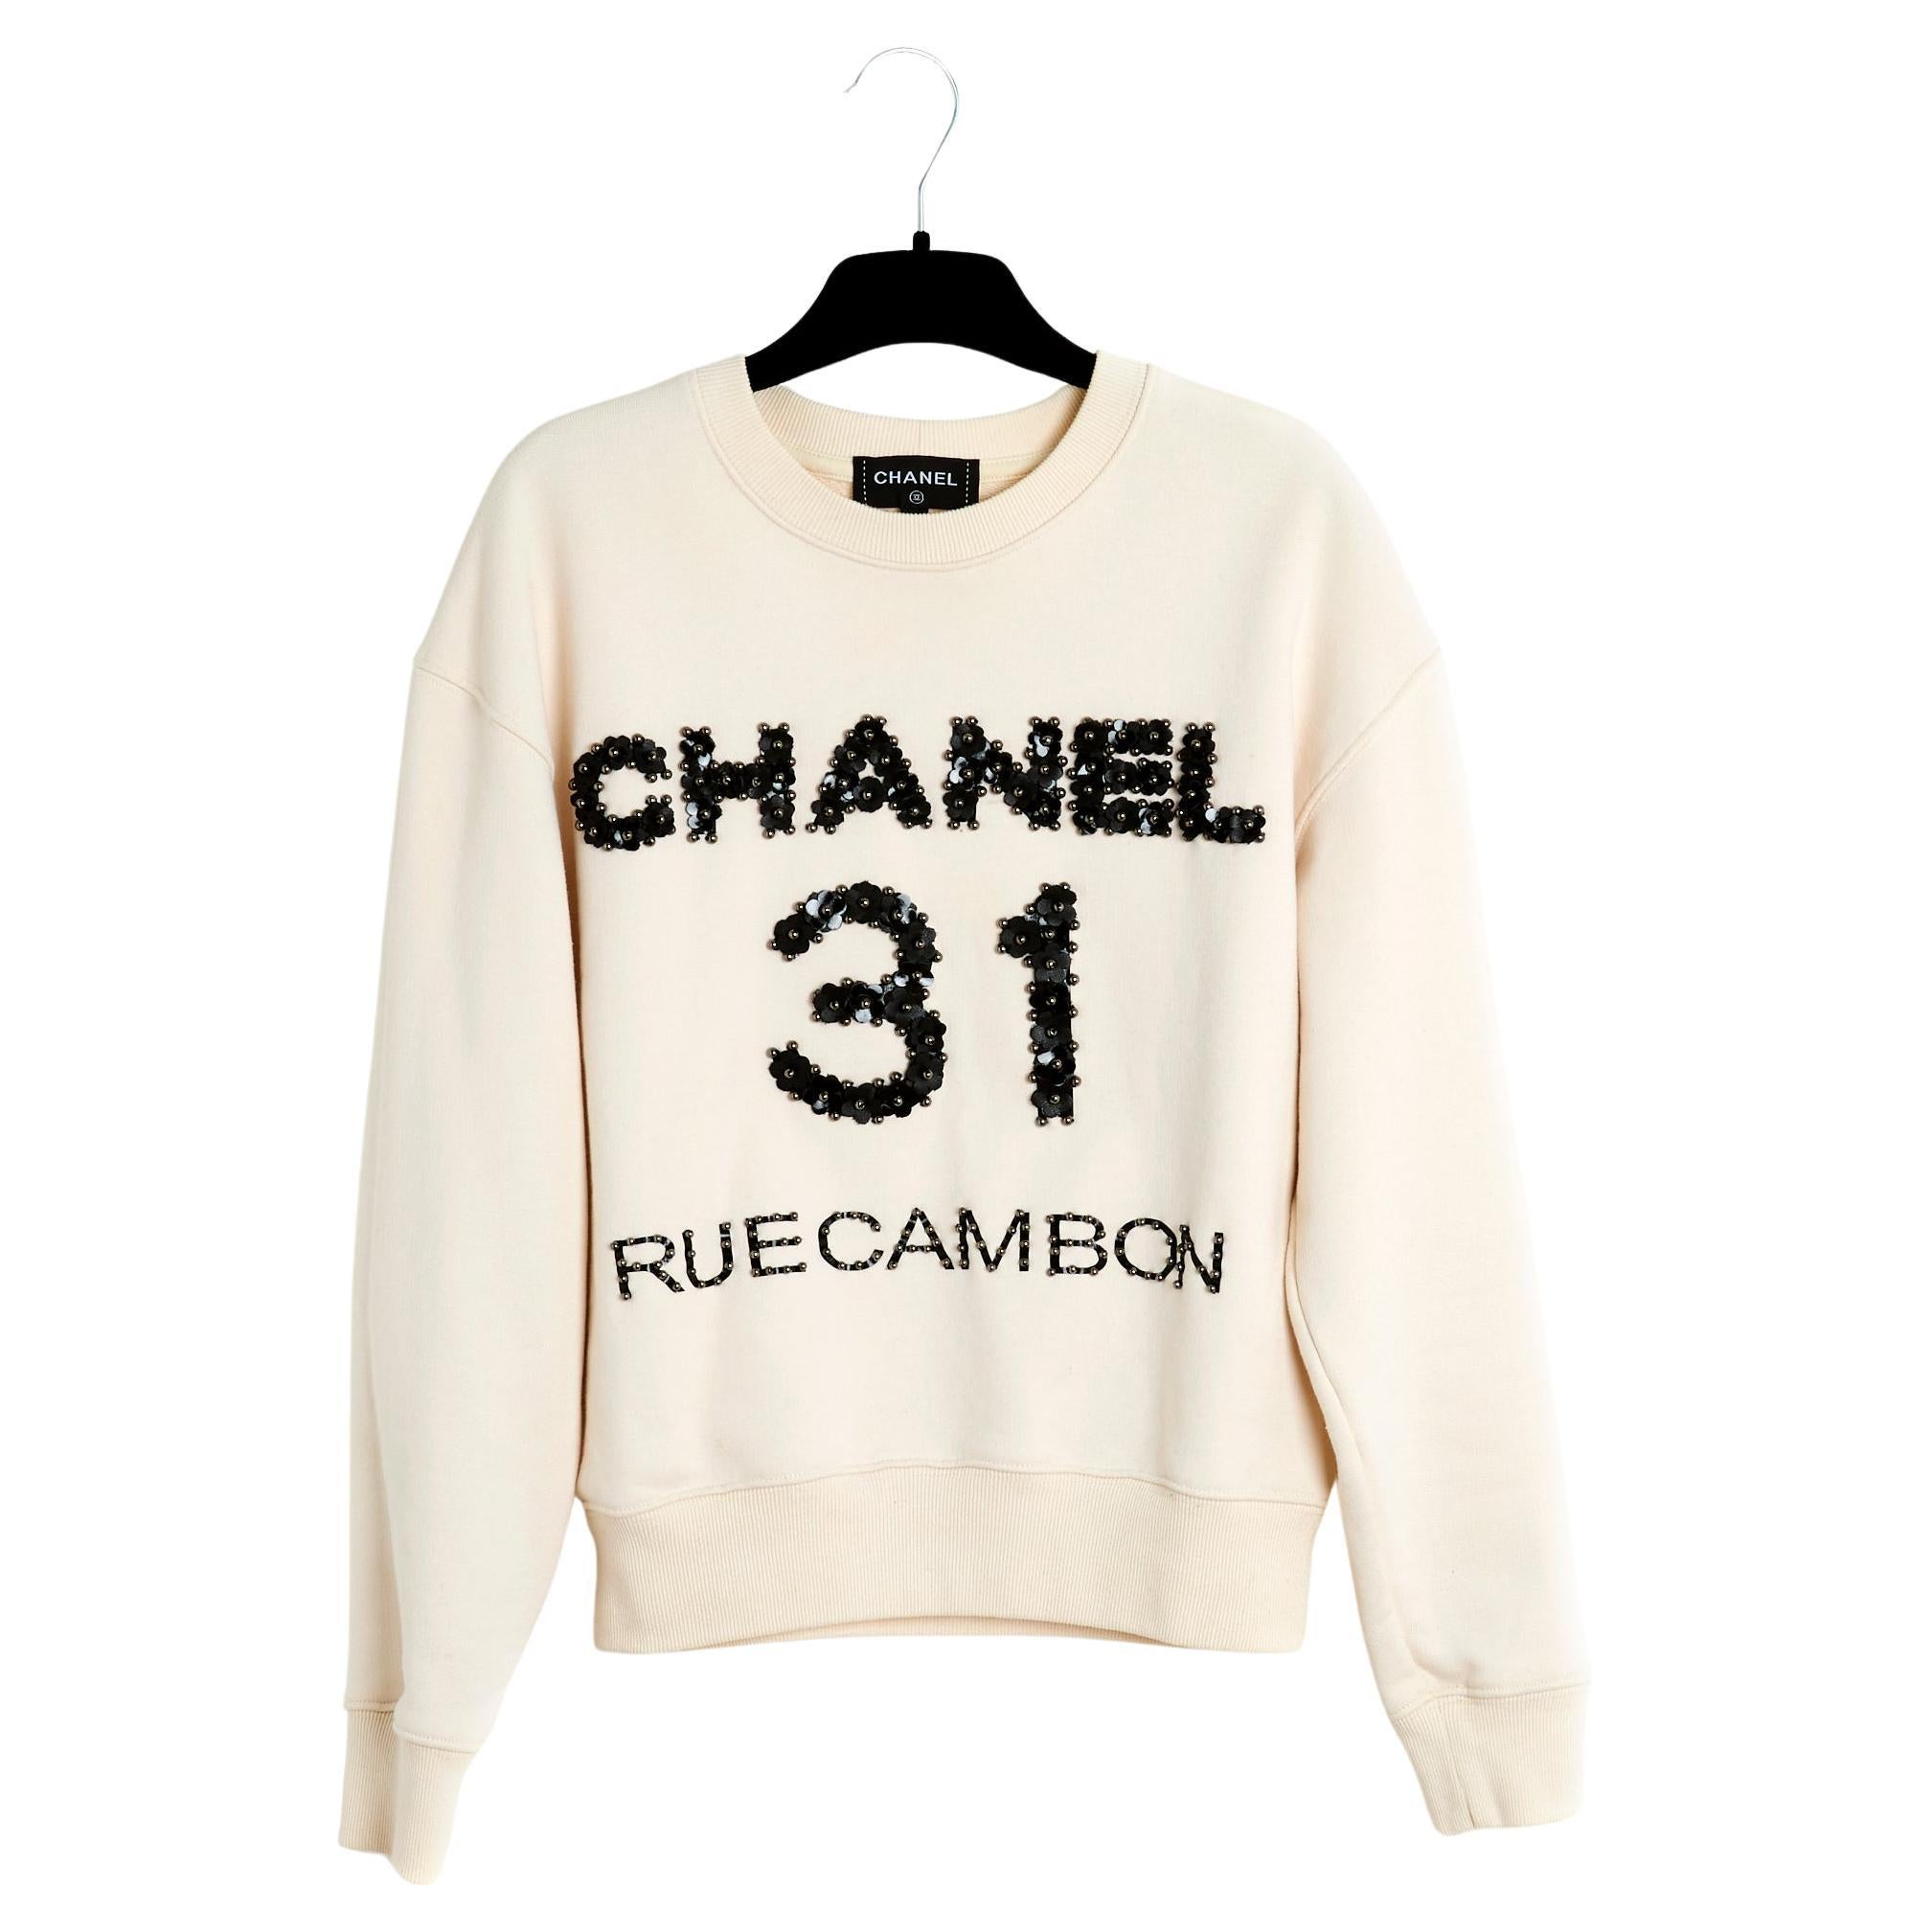 PF2020 Chanel Top Cambon S Sweat shirt Metiers Art 2020 For Sale